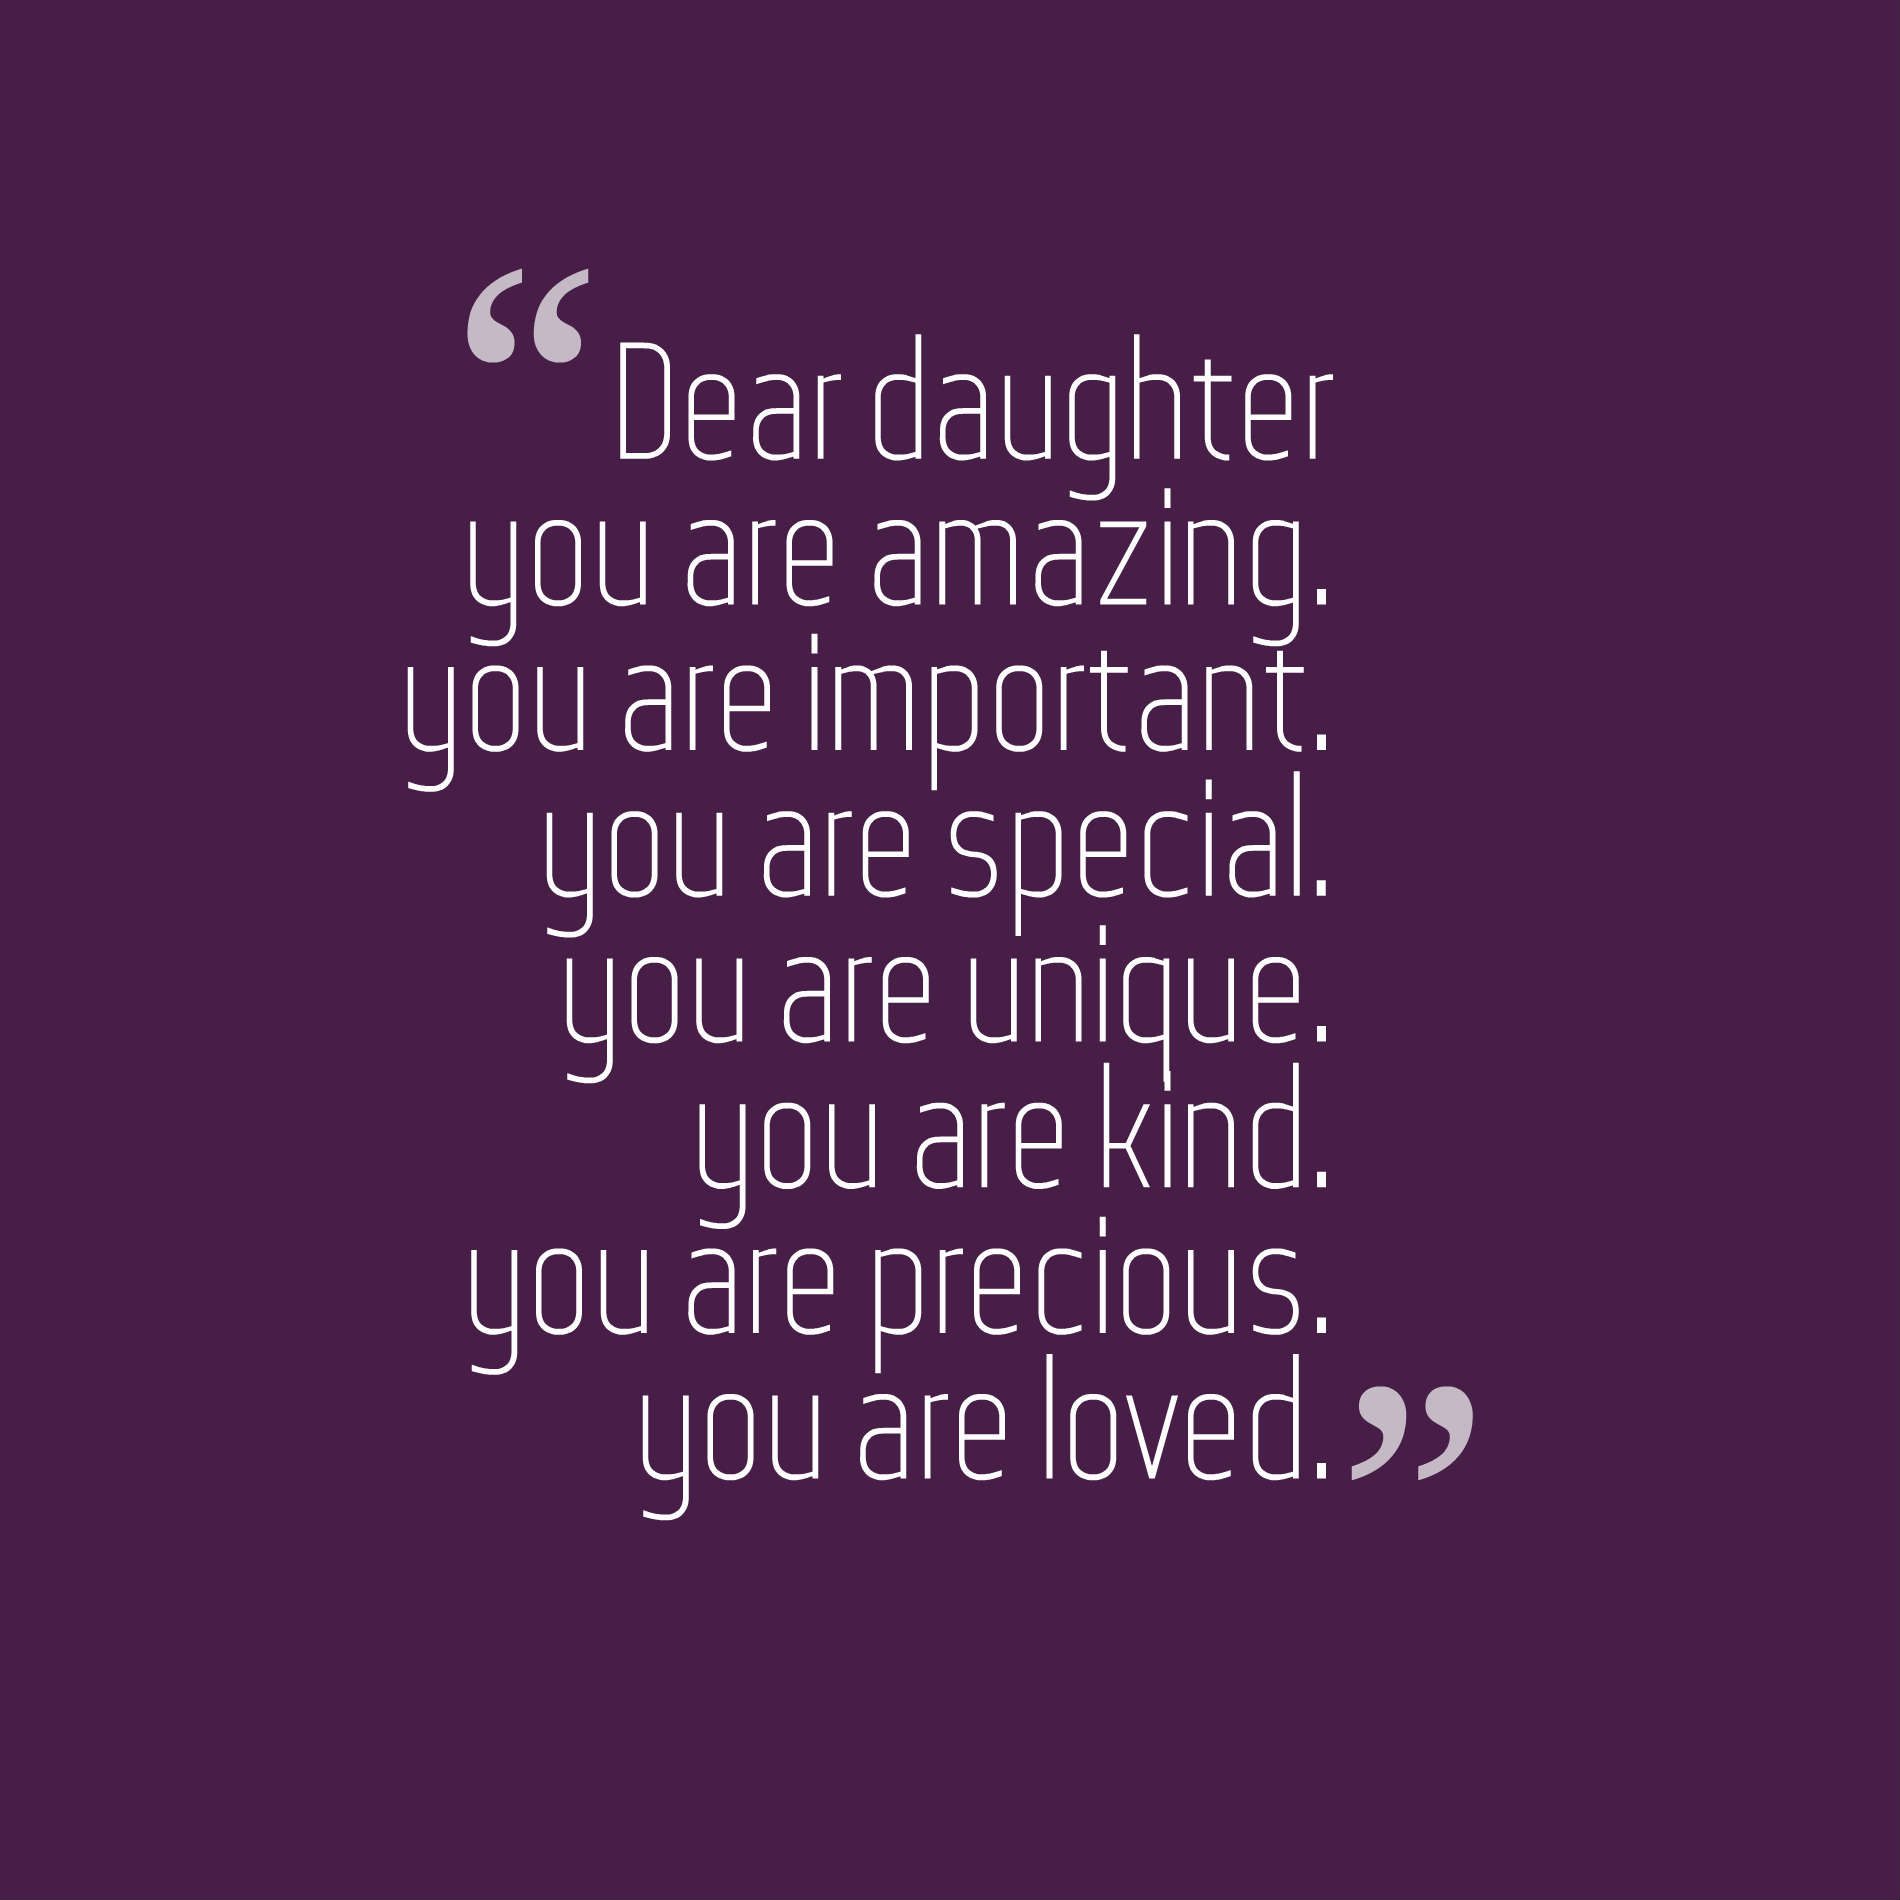 Dear daughter you are amazing. you are important. you are special. you are unique. you are kind. you are precious. you are loved.